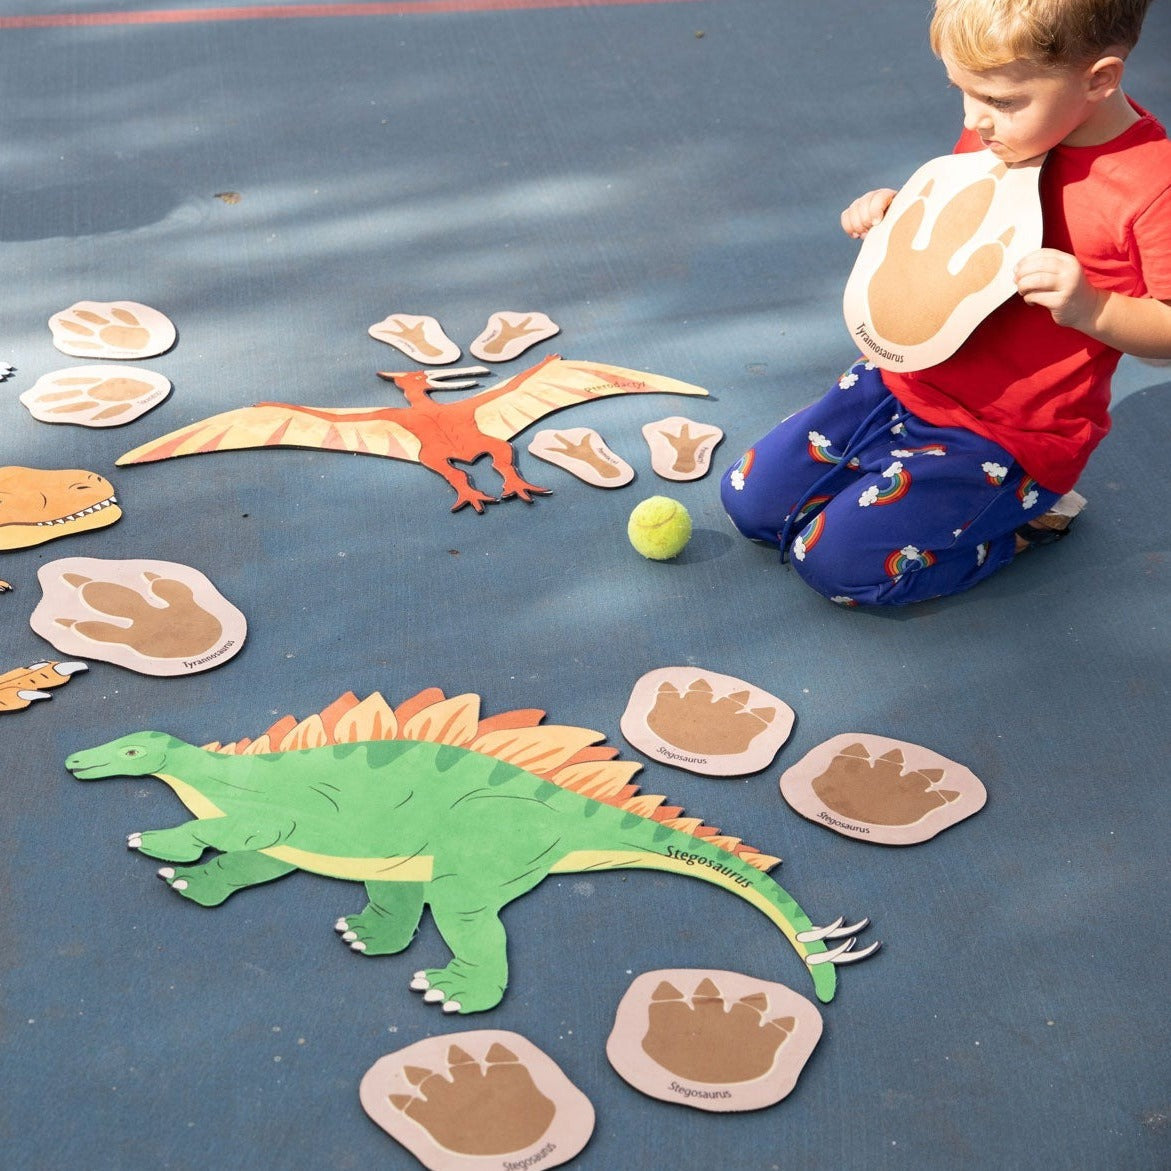 Chasing Dinosaurs, Introduce your little ones to the fascinating world of dinosaurs with our Dinosaur Footprint Trailset! This exciting playmat set features 20 non-slip, thick, natural rubber backed mats that come in various sizes, from 78cm for the largest piece to 13cm for the smallest piece. Each mat displays a colourful footprint of a different dinosaur including the Pterodactyl, Stegosaurus, Triceratops and Tyrannosaurus Rex, which makes learning fun and engaging.The Chasing Dinosaurs mats are also con